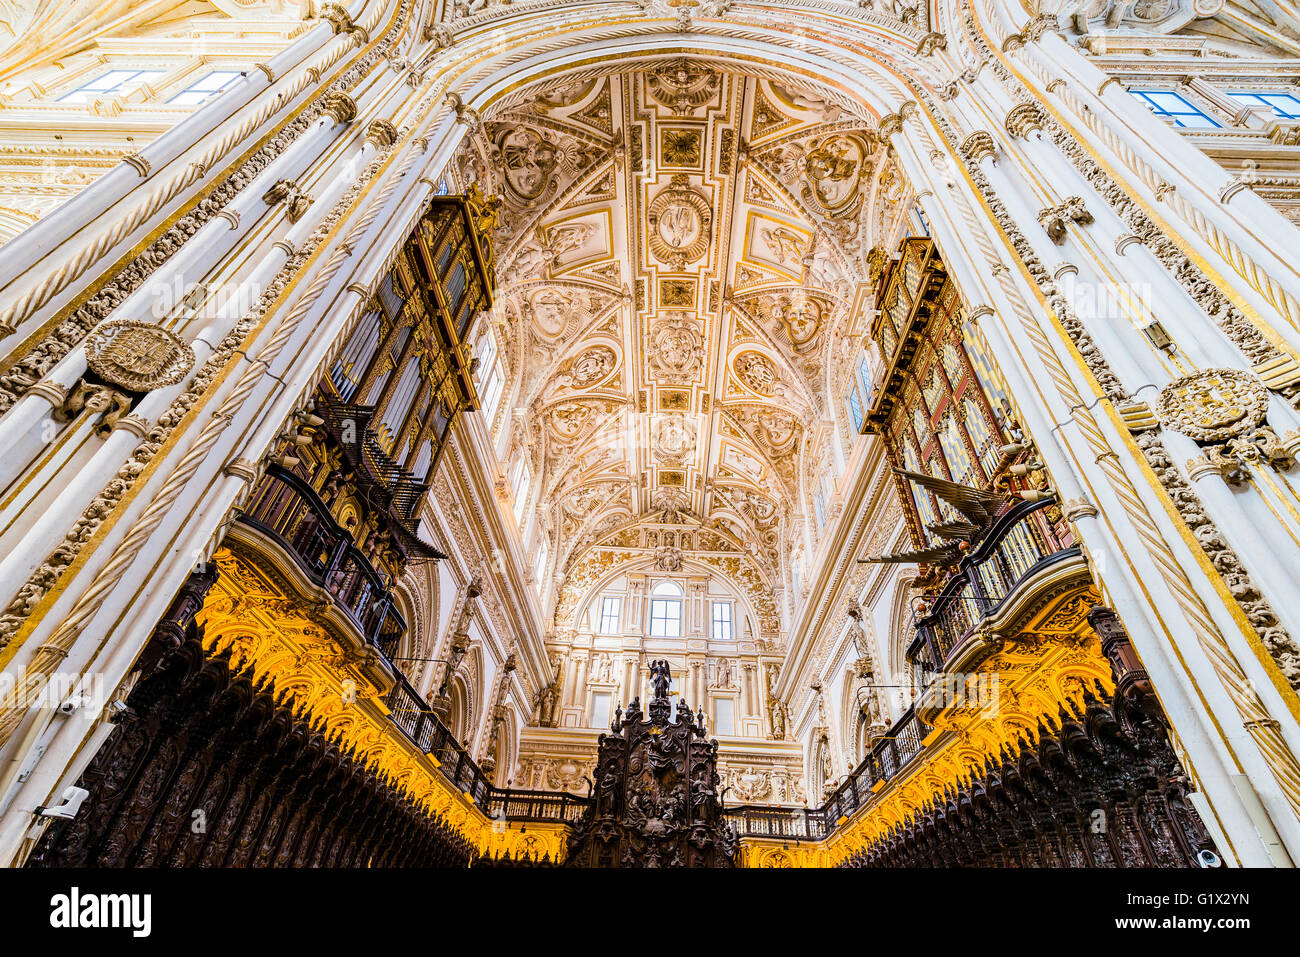 Ceiling and choir, Mosque-Cathedral of Córdoba, Andalusia, Spain, Europe Stock Photo